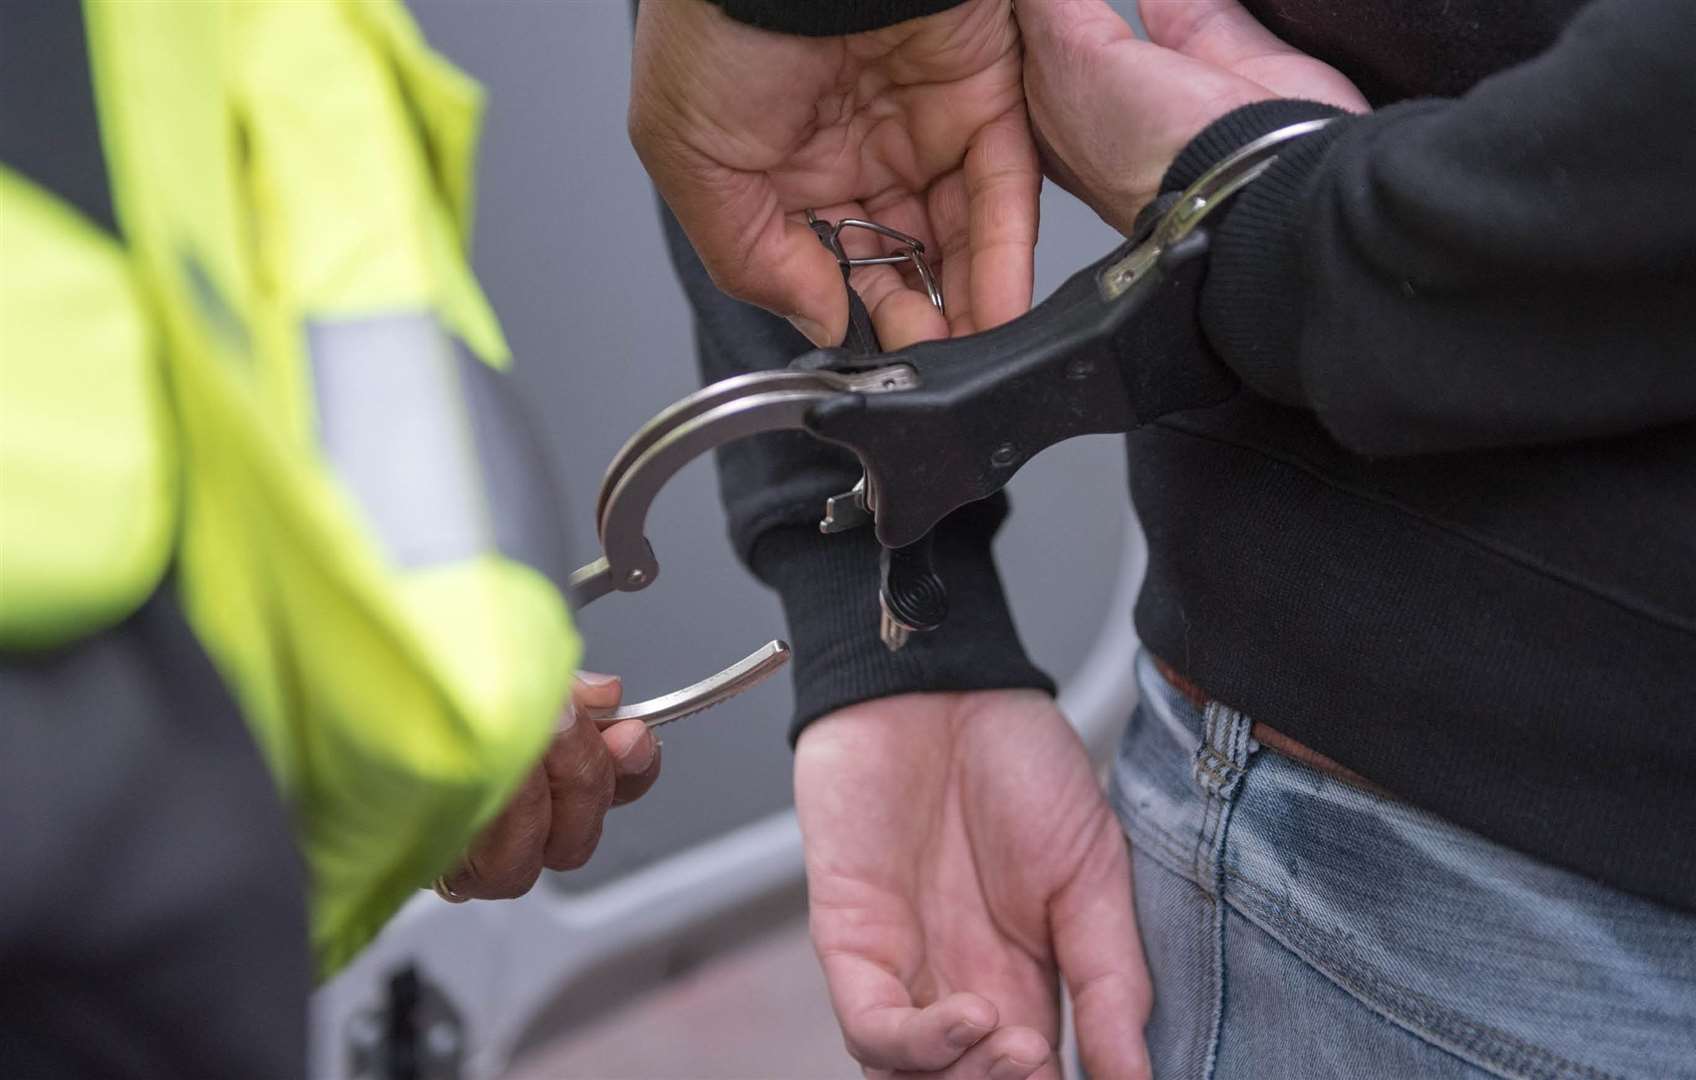 Three men have been arrested